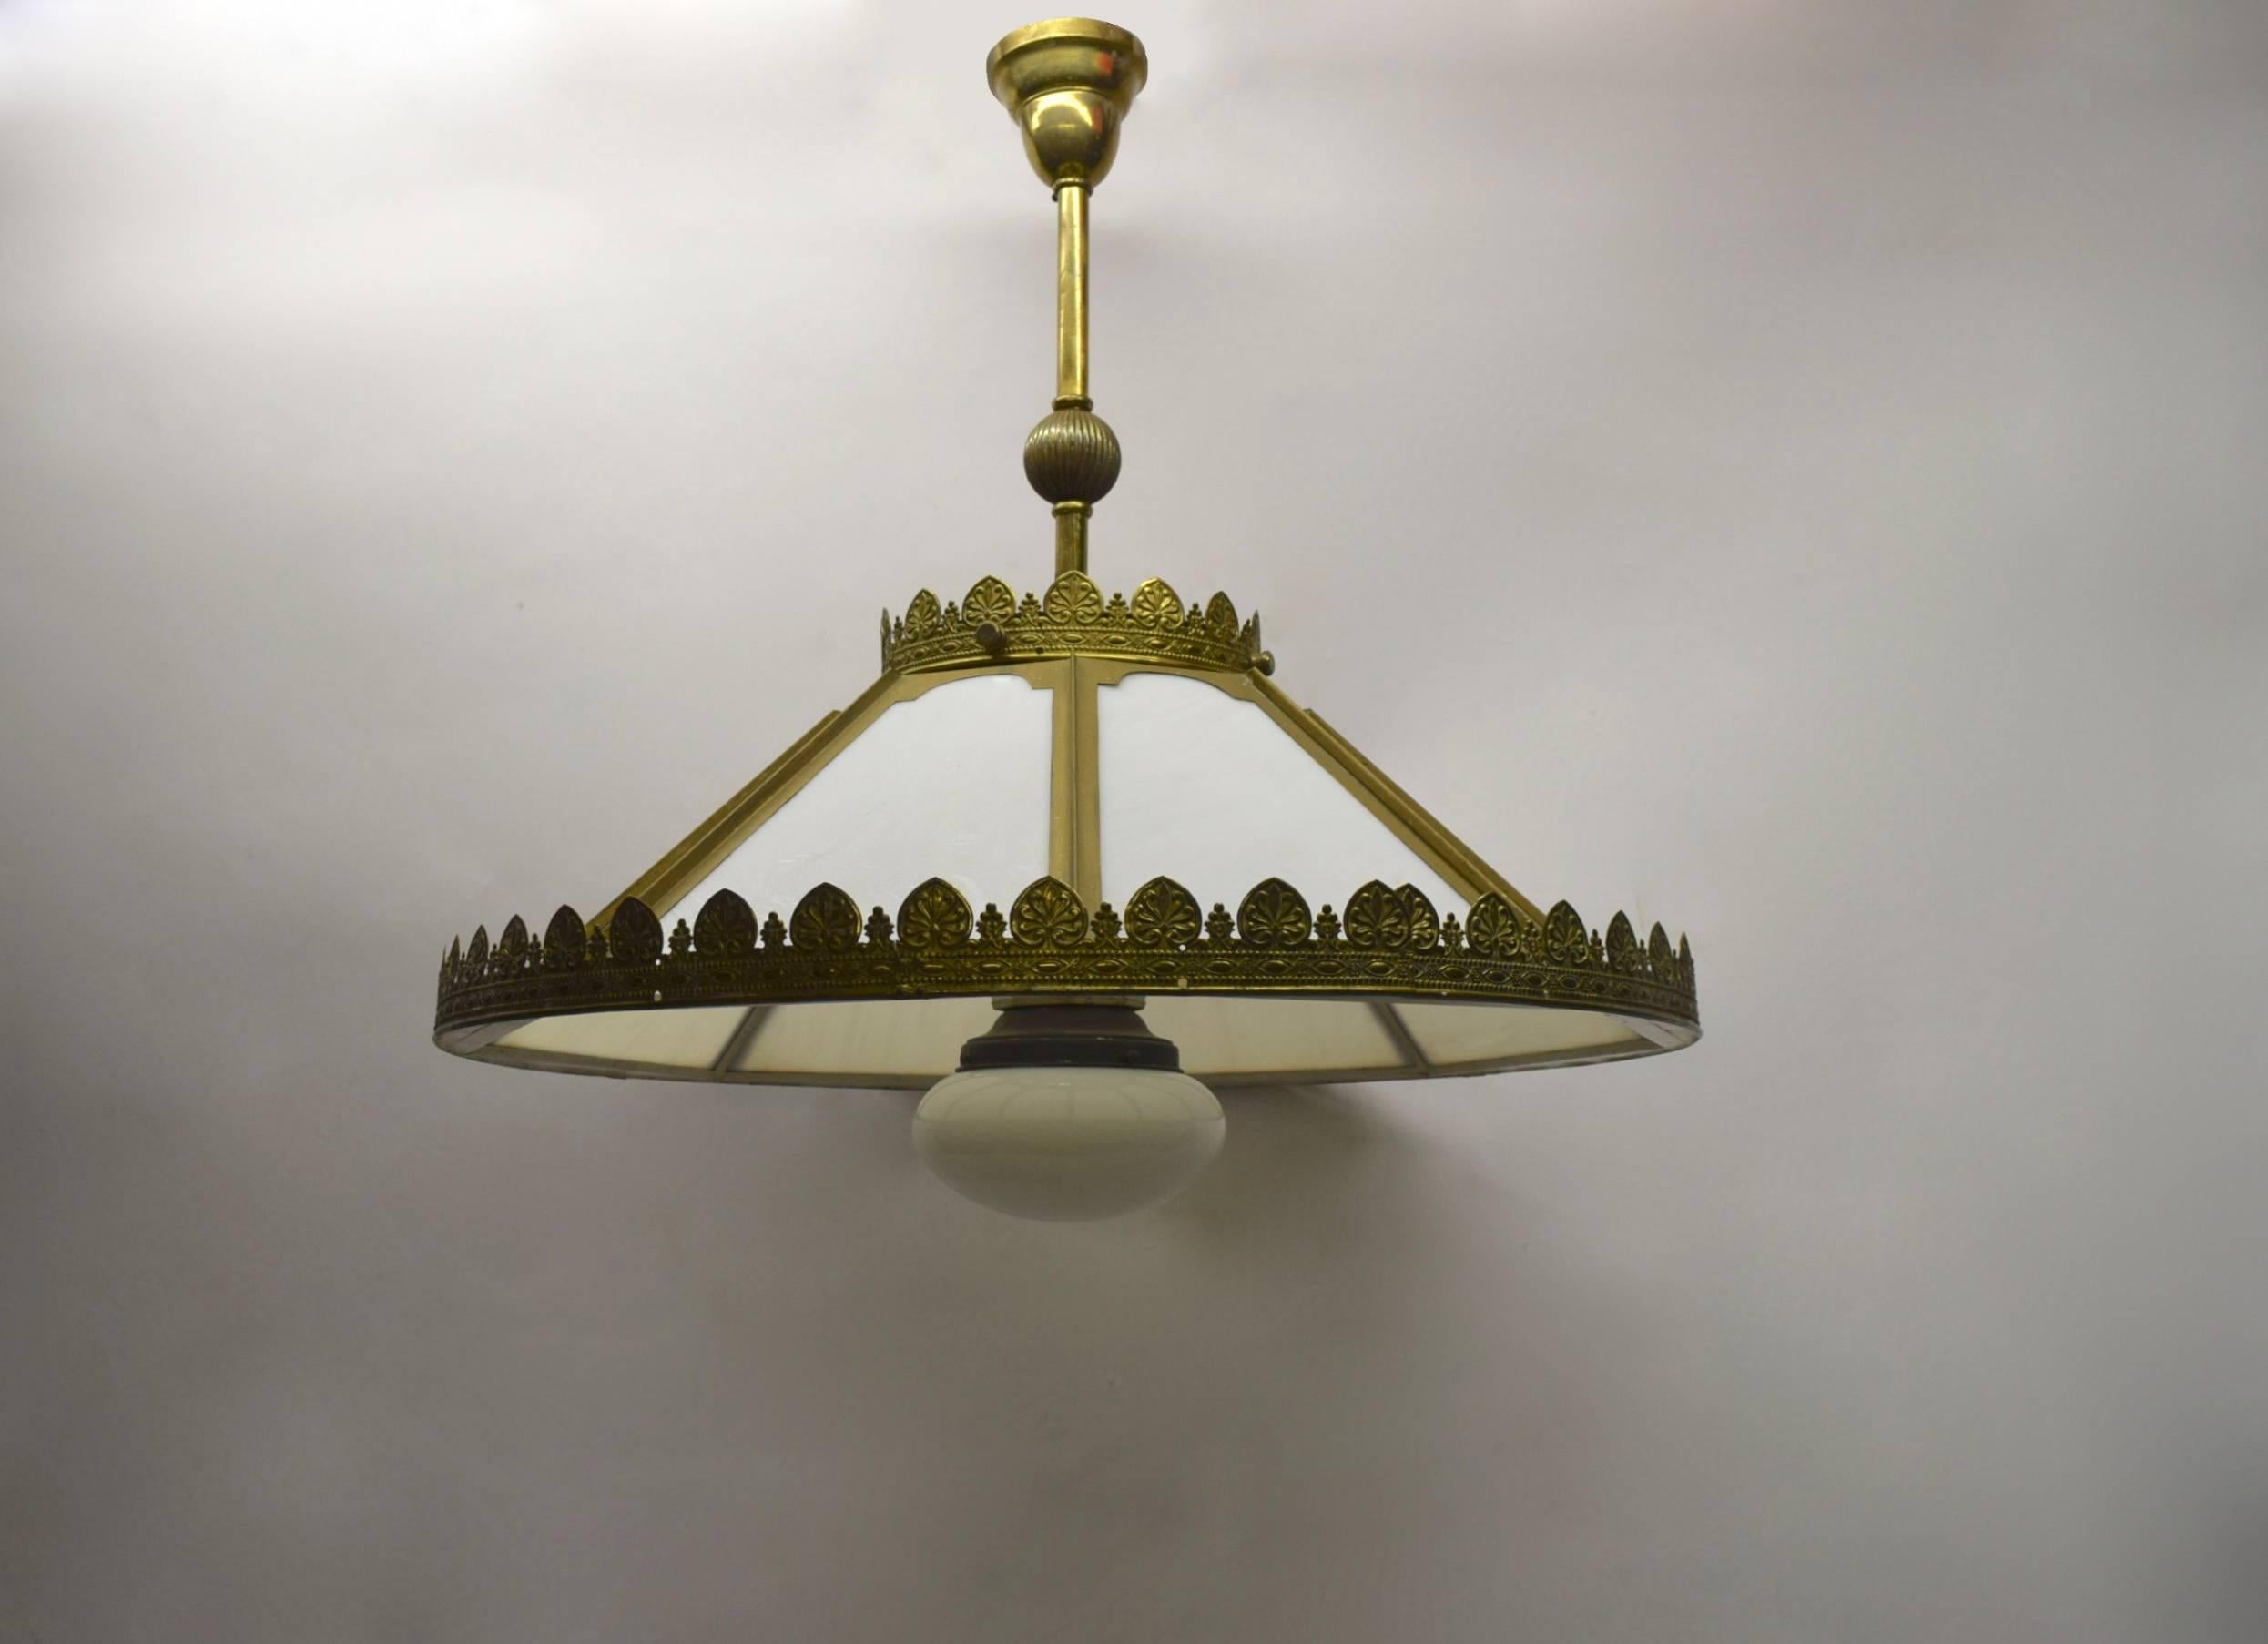 Ceiling fixture from the late 19th century that was originally lit by oil and has been switched to electric current. The fixture has original hardware and canopy, an eight-section exterior shade, encircled with stamped metal trimming, and a